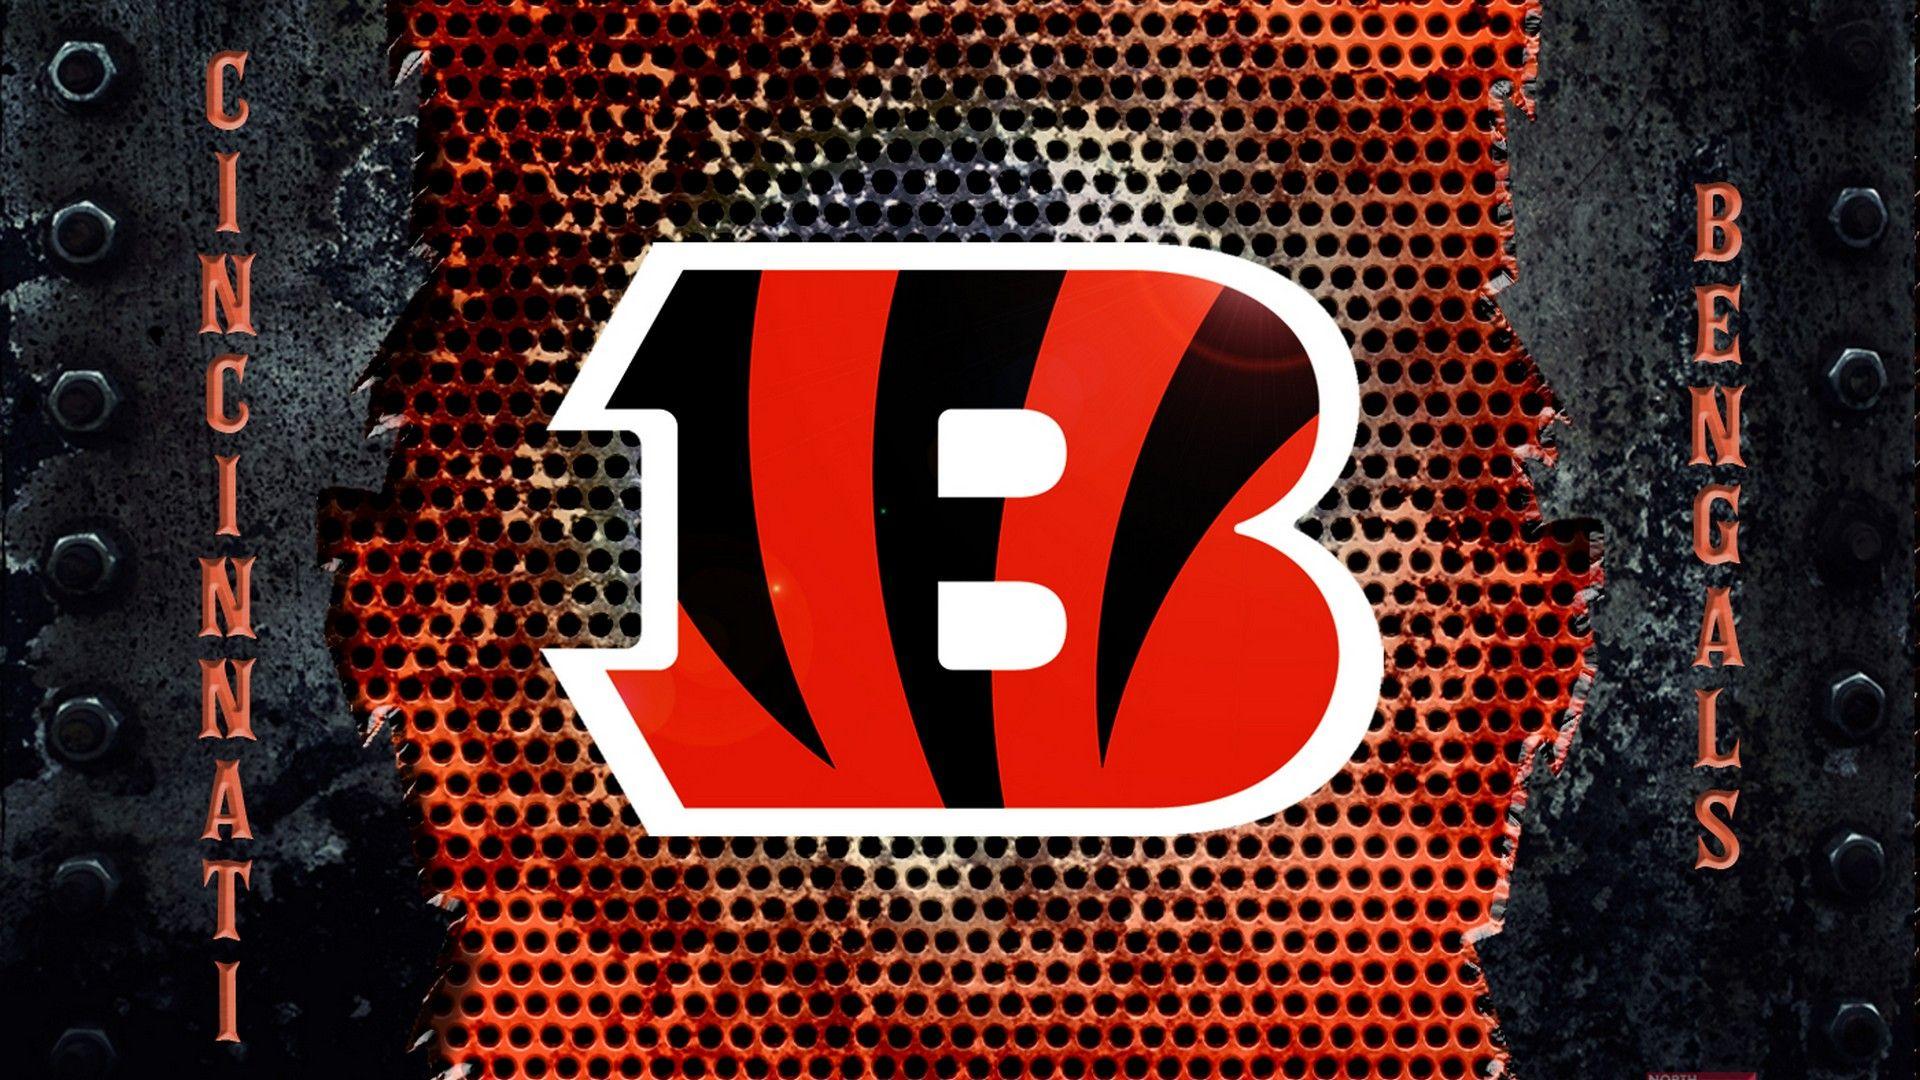 Share more than 59 bengals phone wallpaper - in.cdgdbentre